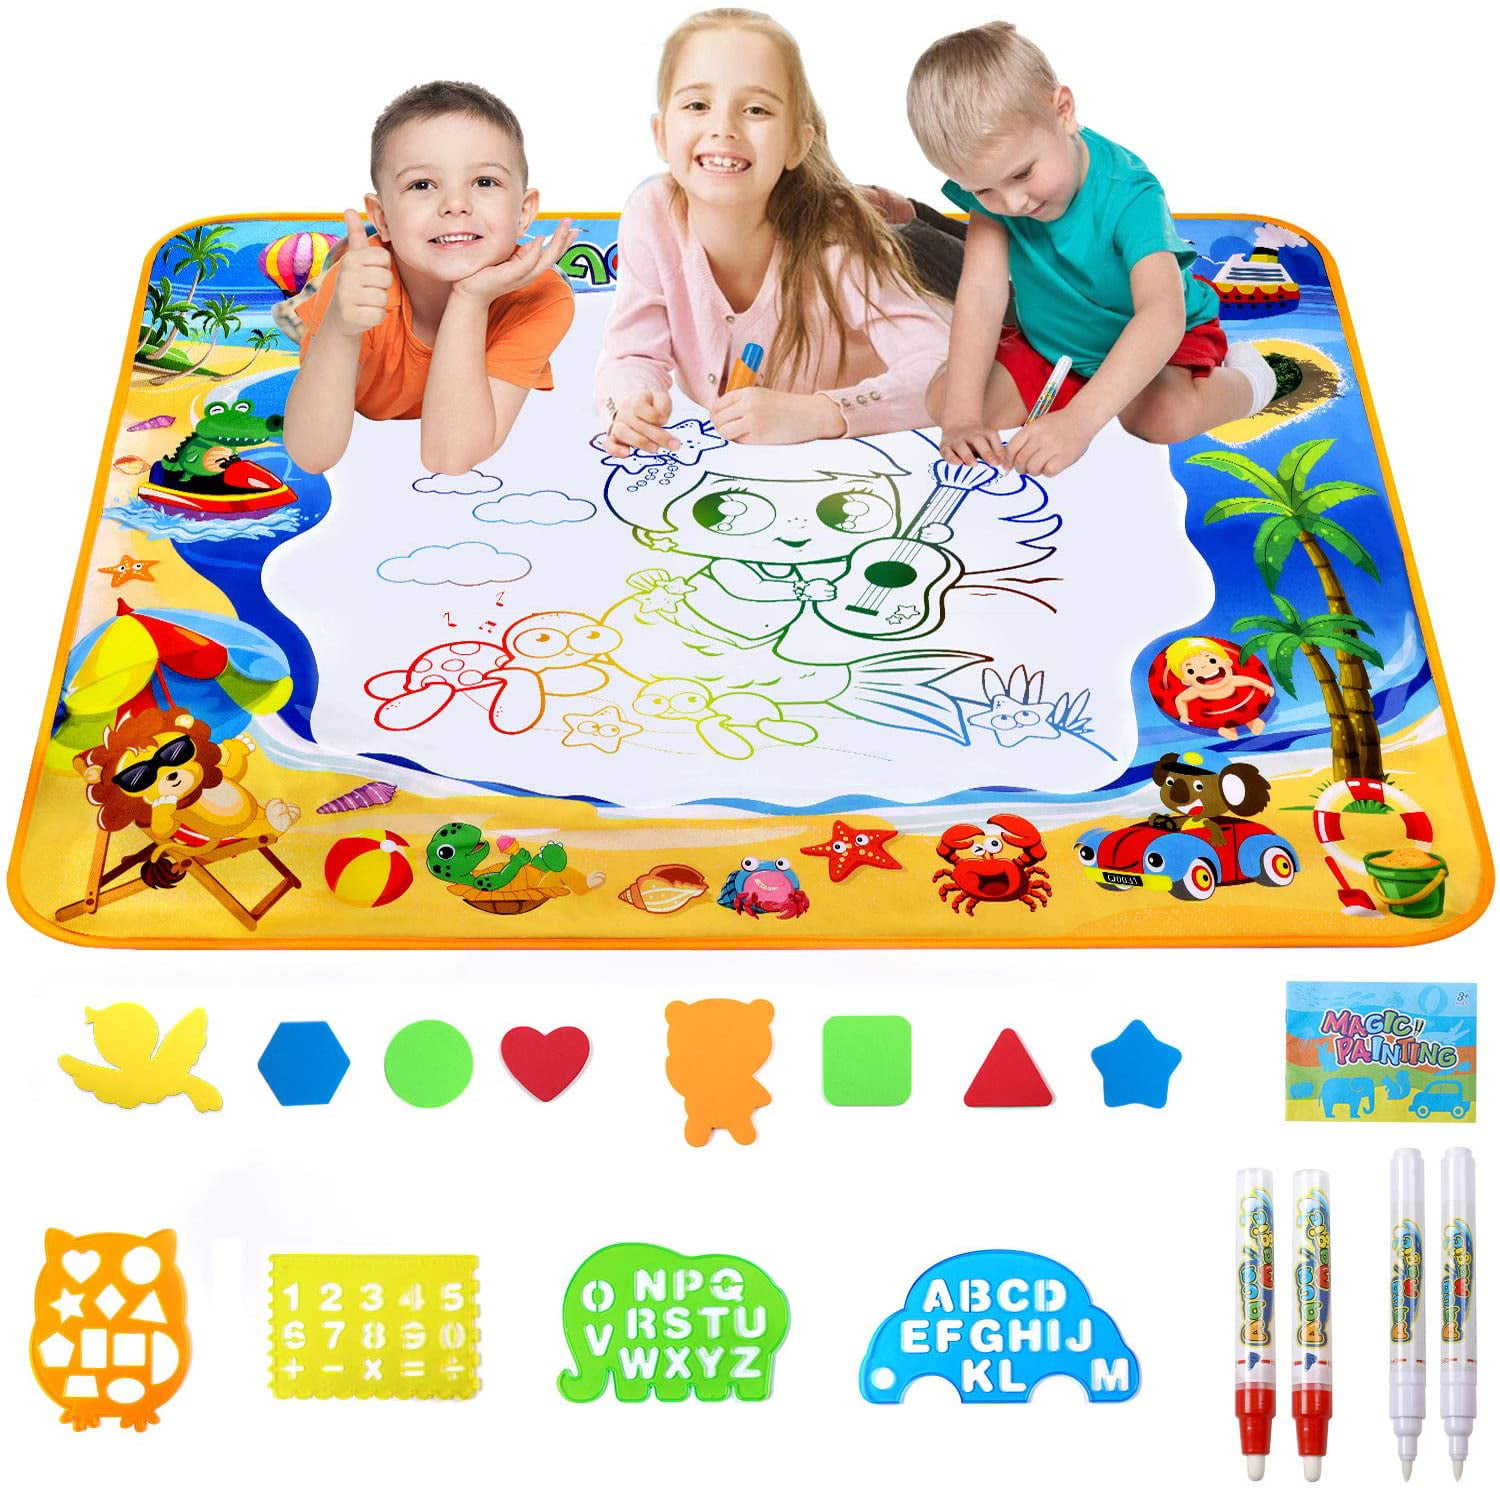 Large Aqua Magic Water Drawing Painting doodle Mat Pad with 2 Water Pen Toy 